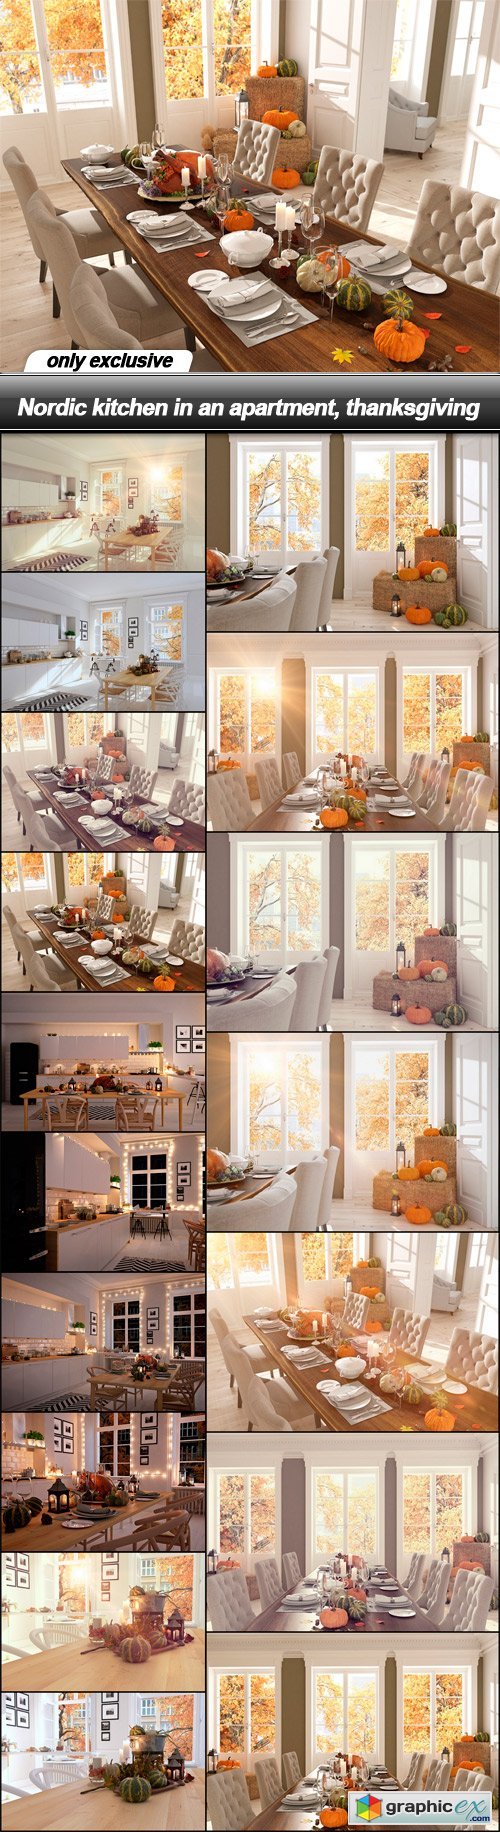 Nordic kitchen in an apartment, thanksgiving - 17 UHQ JPEG